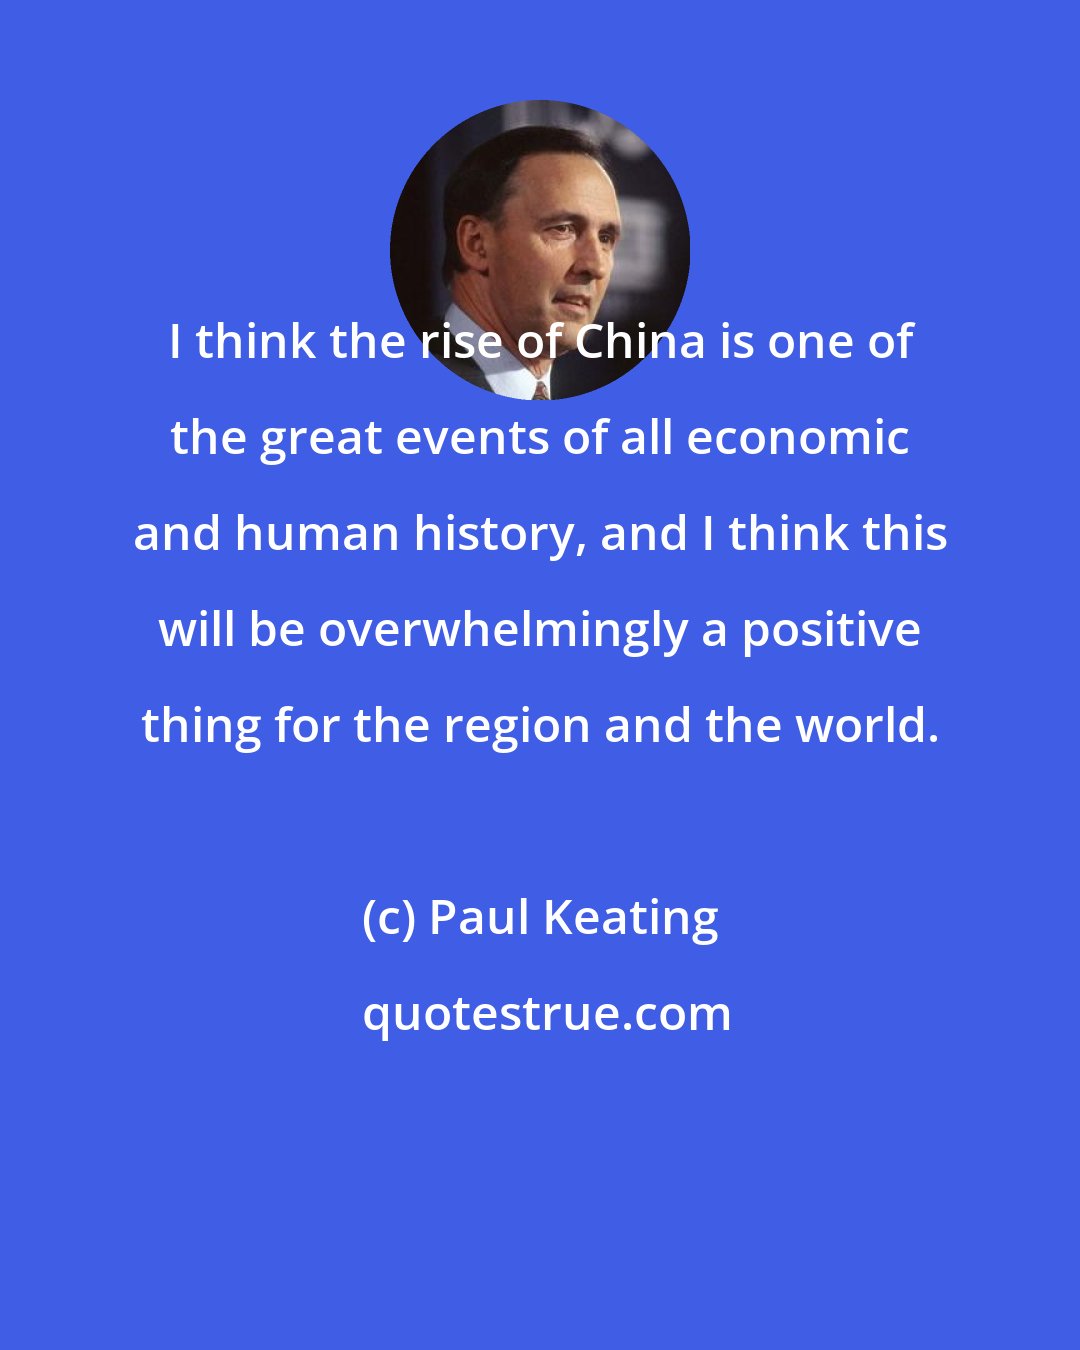 Paul Keating: I think the rise of China is one of the great events of all economic and human history, and I think this will be overwhelmingly a positive thing for the region and the world.